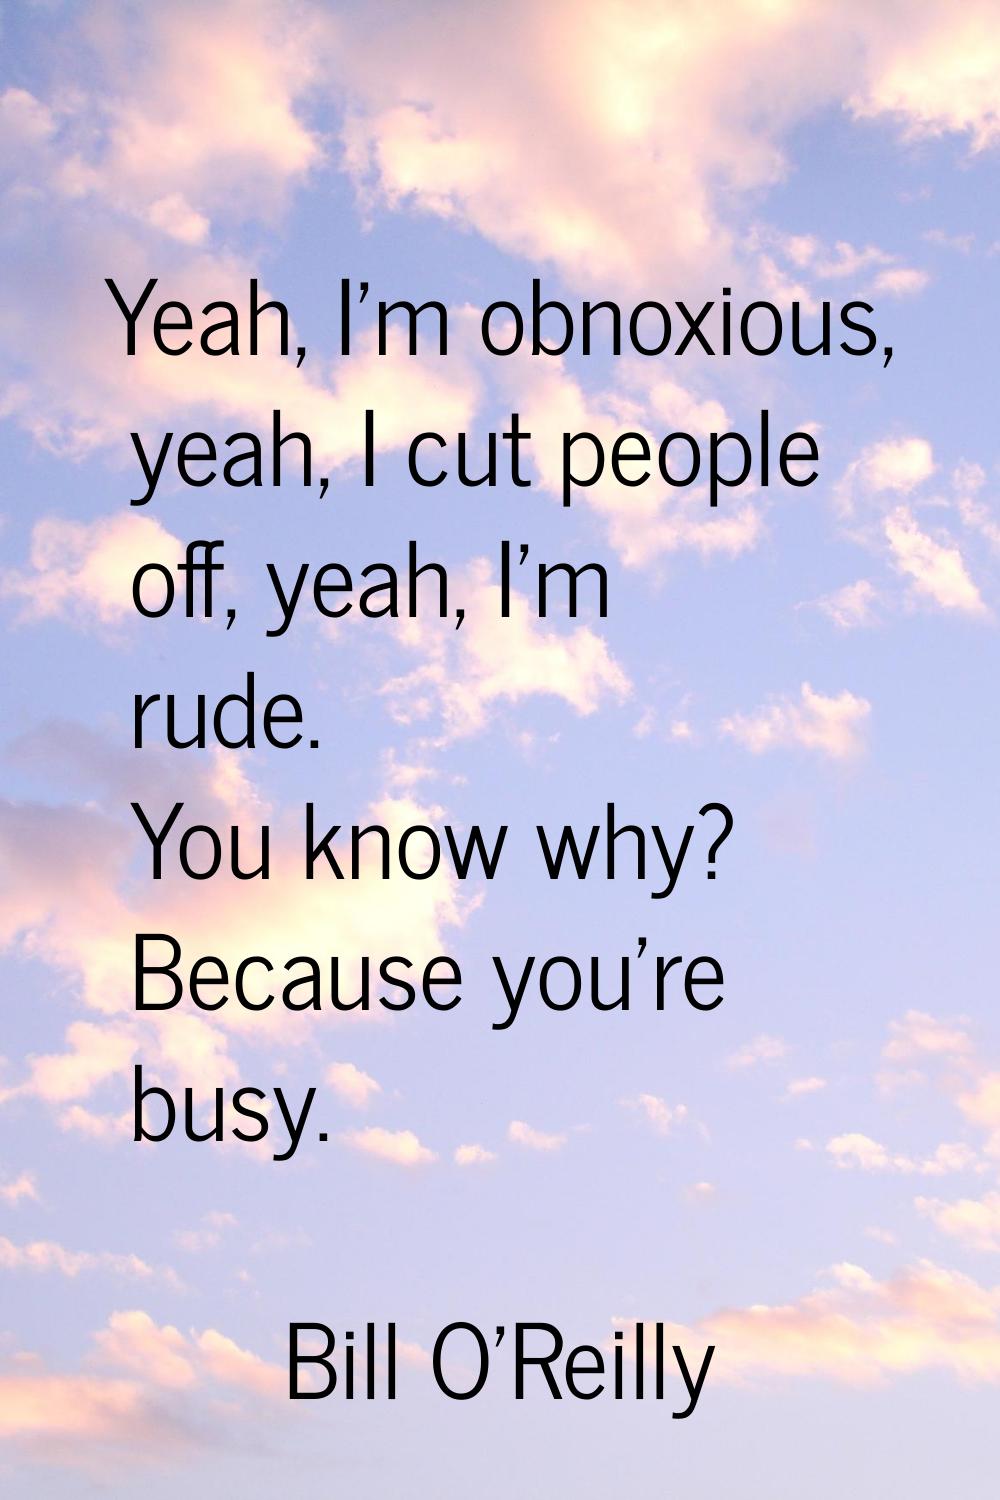 Yeah, I'm obnoxious, yeah, I cut people off, yeah, I'm rude. You know why? Because you're busy.